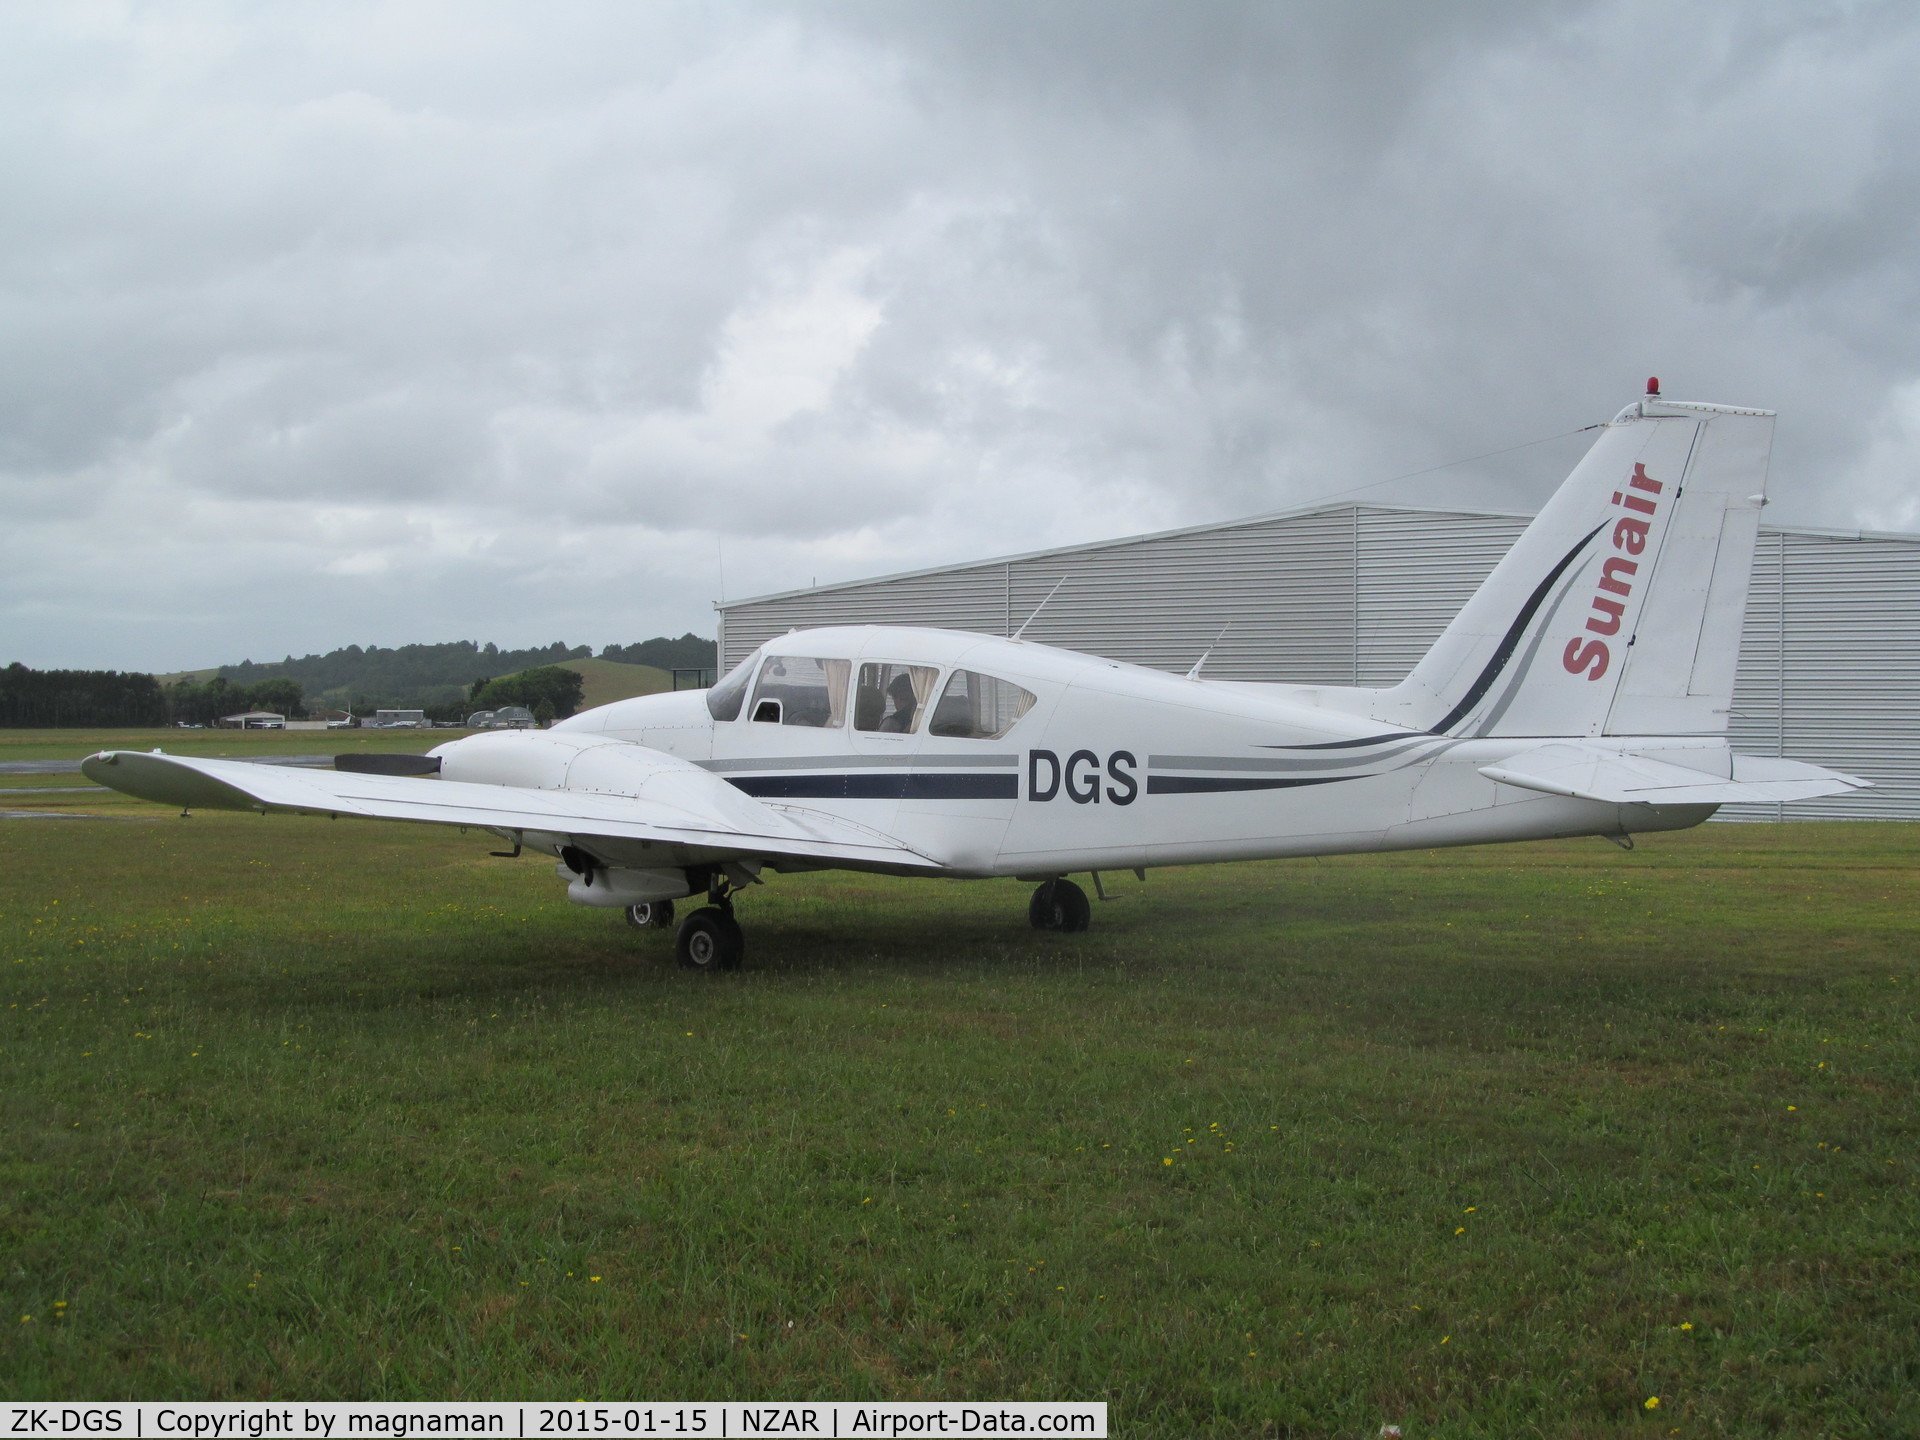 ZK-DGS, Piper PA-23-250 C/N 27-7304959, on grass at ardmore